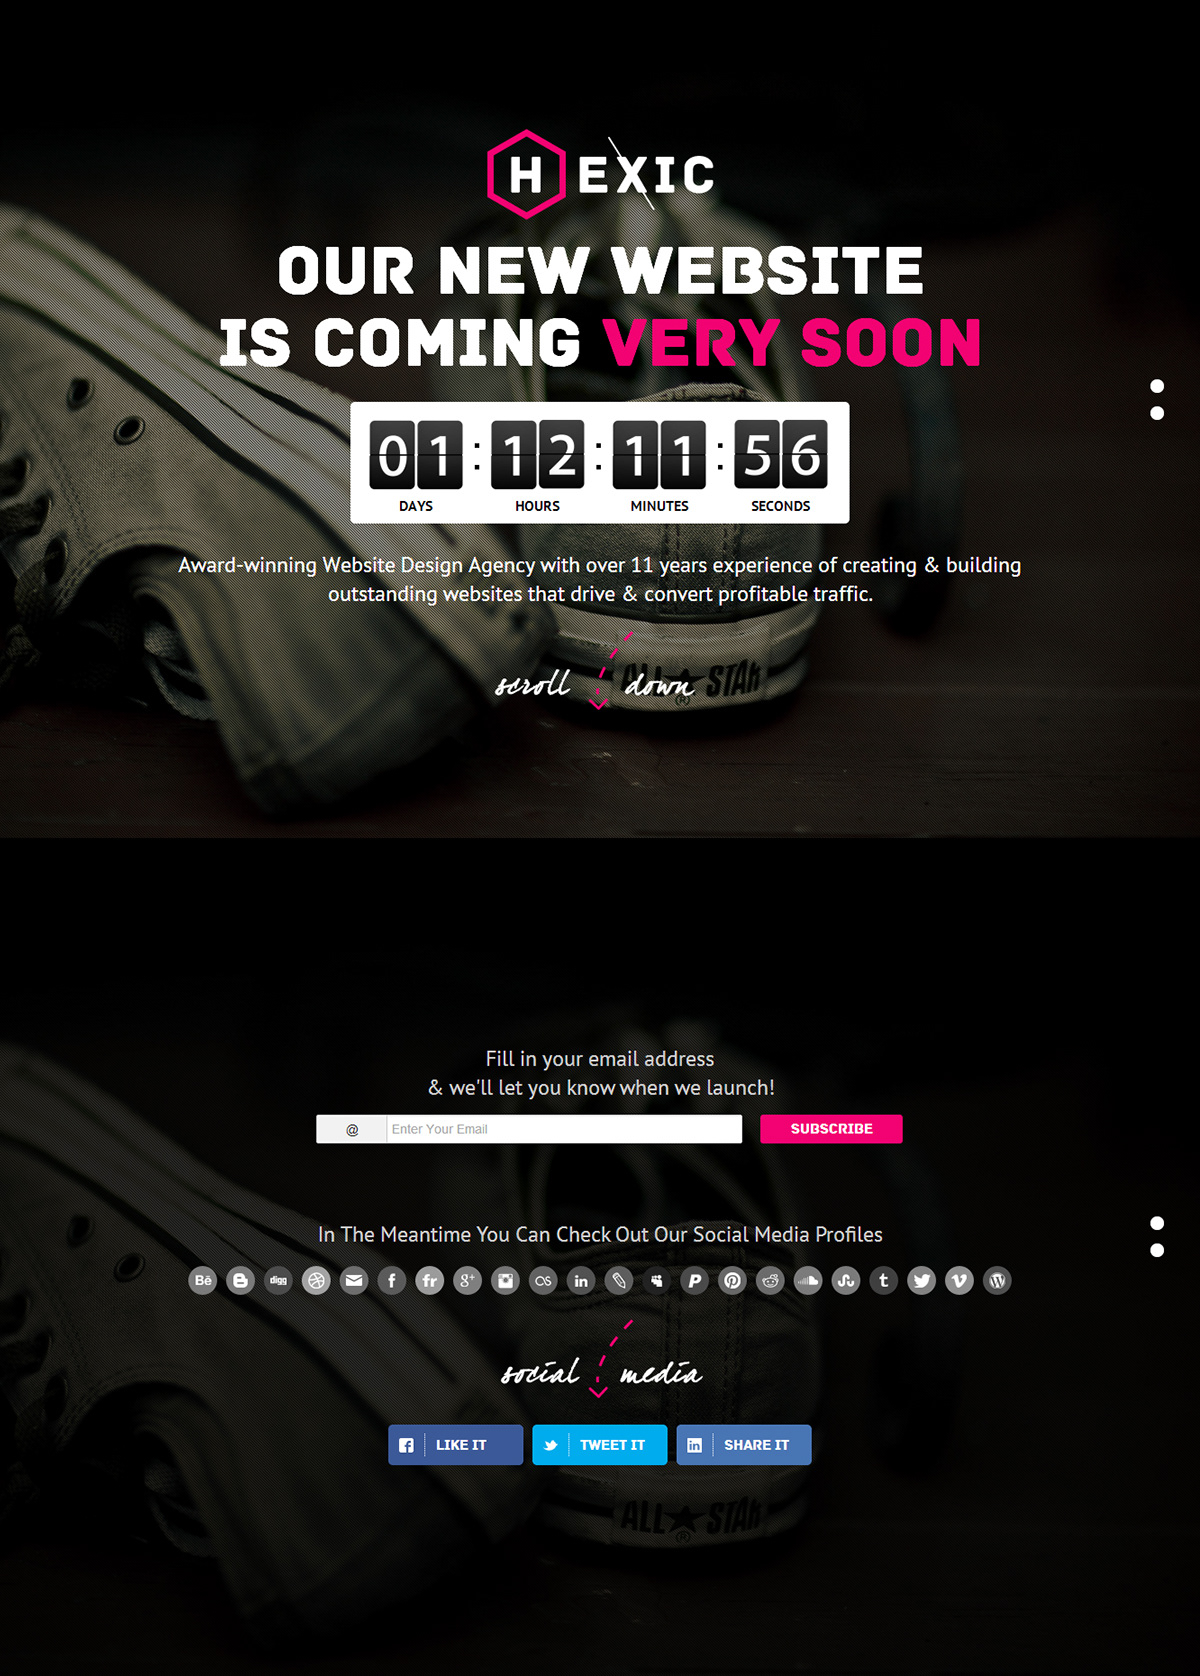 countdown  coming soon under construction website template  HTML5 html5 template Web Template